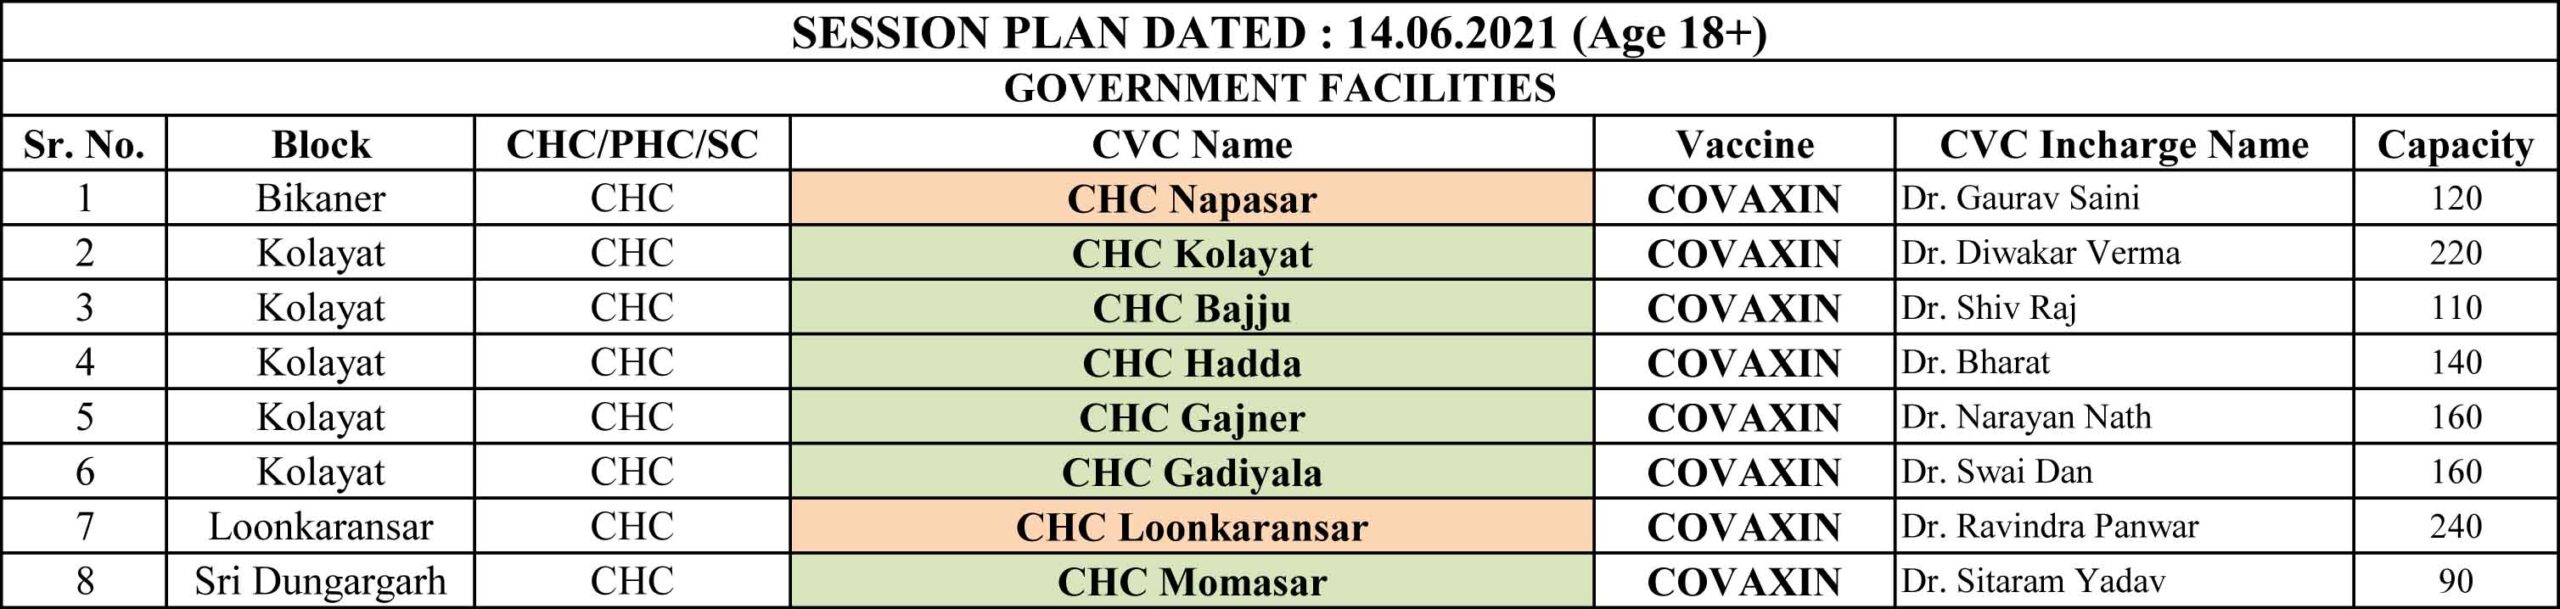 18 Session Plan Dated 14 scaled